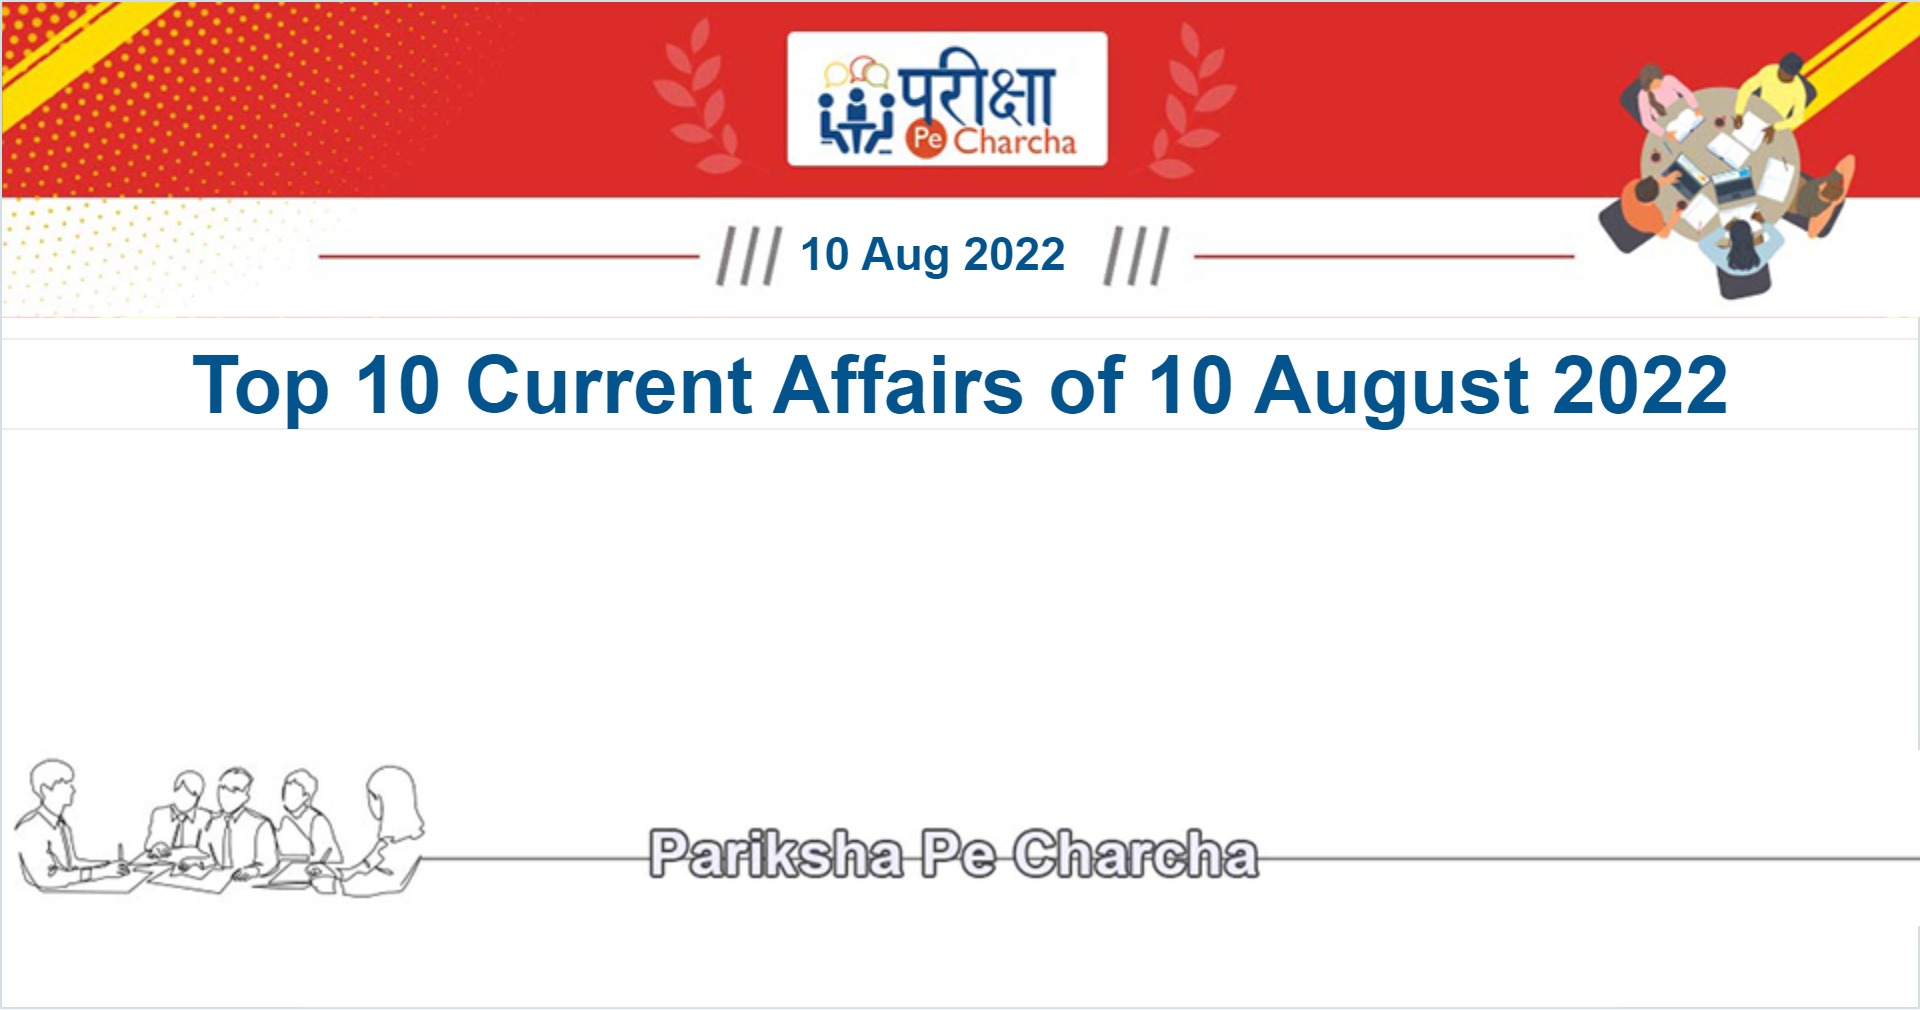 top-10-current-affairs-of-10-august-2022-in-hindi-and-english